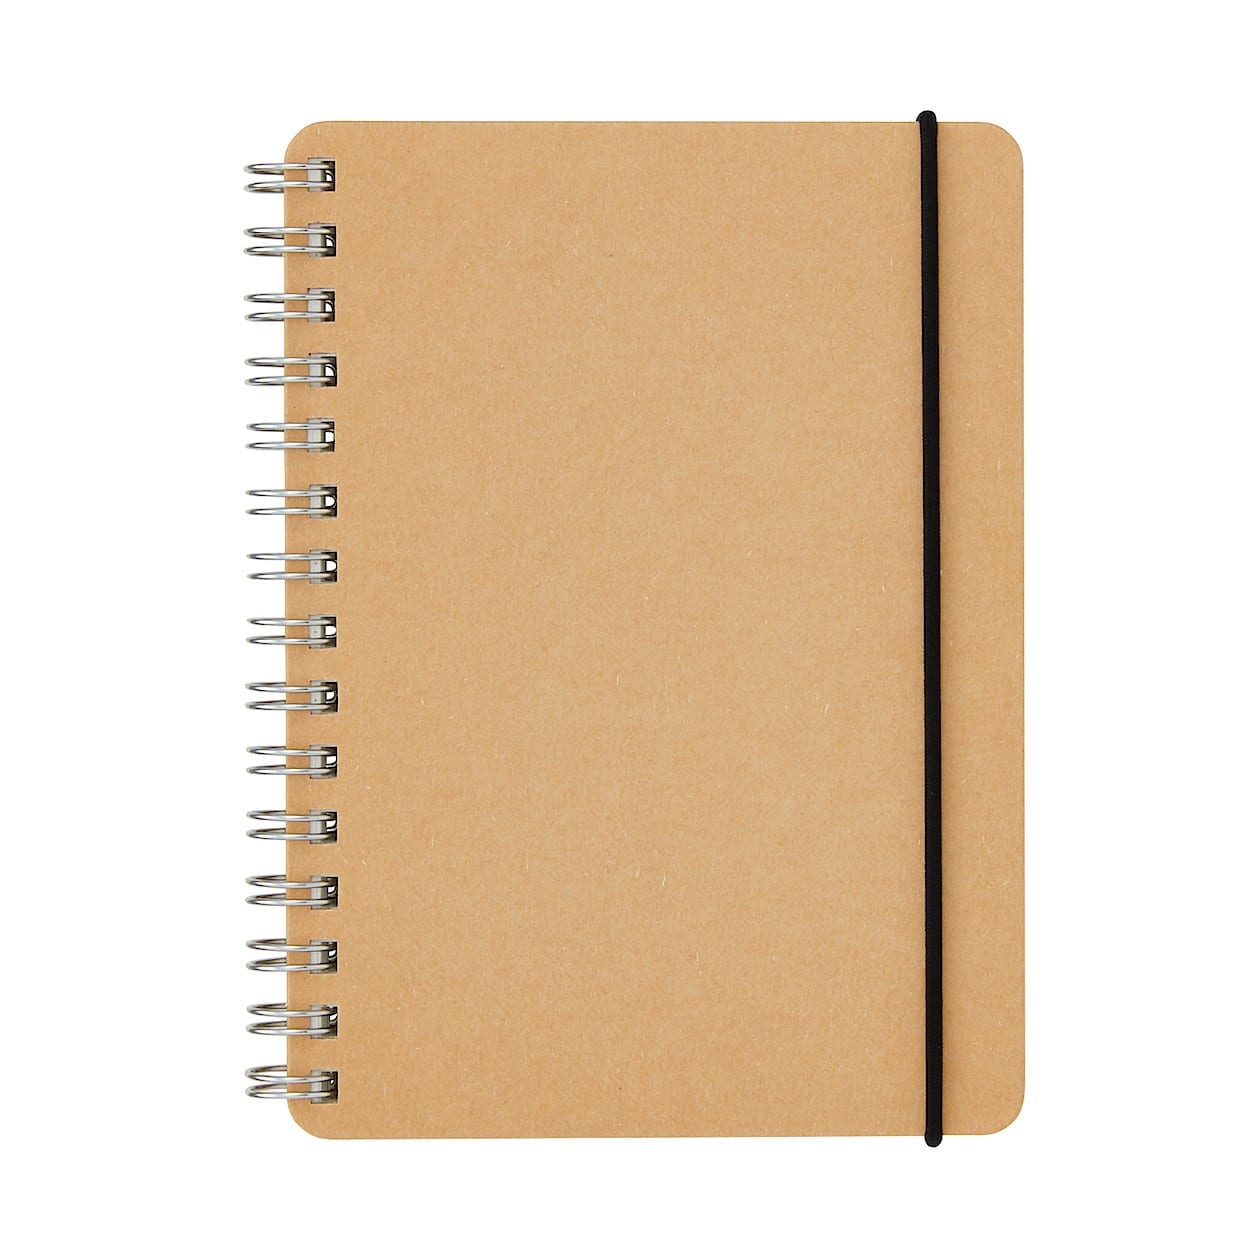 Notebook - Packing Advice